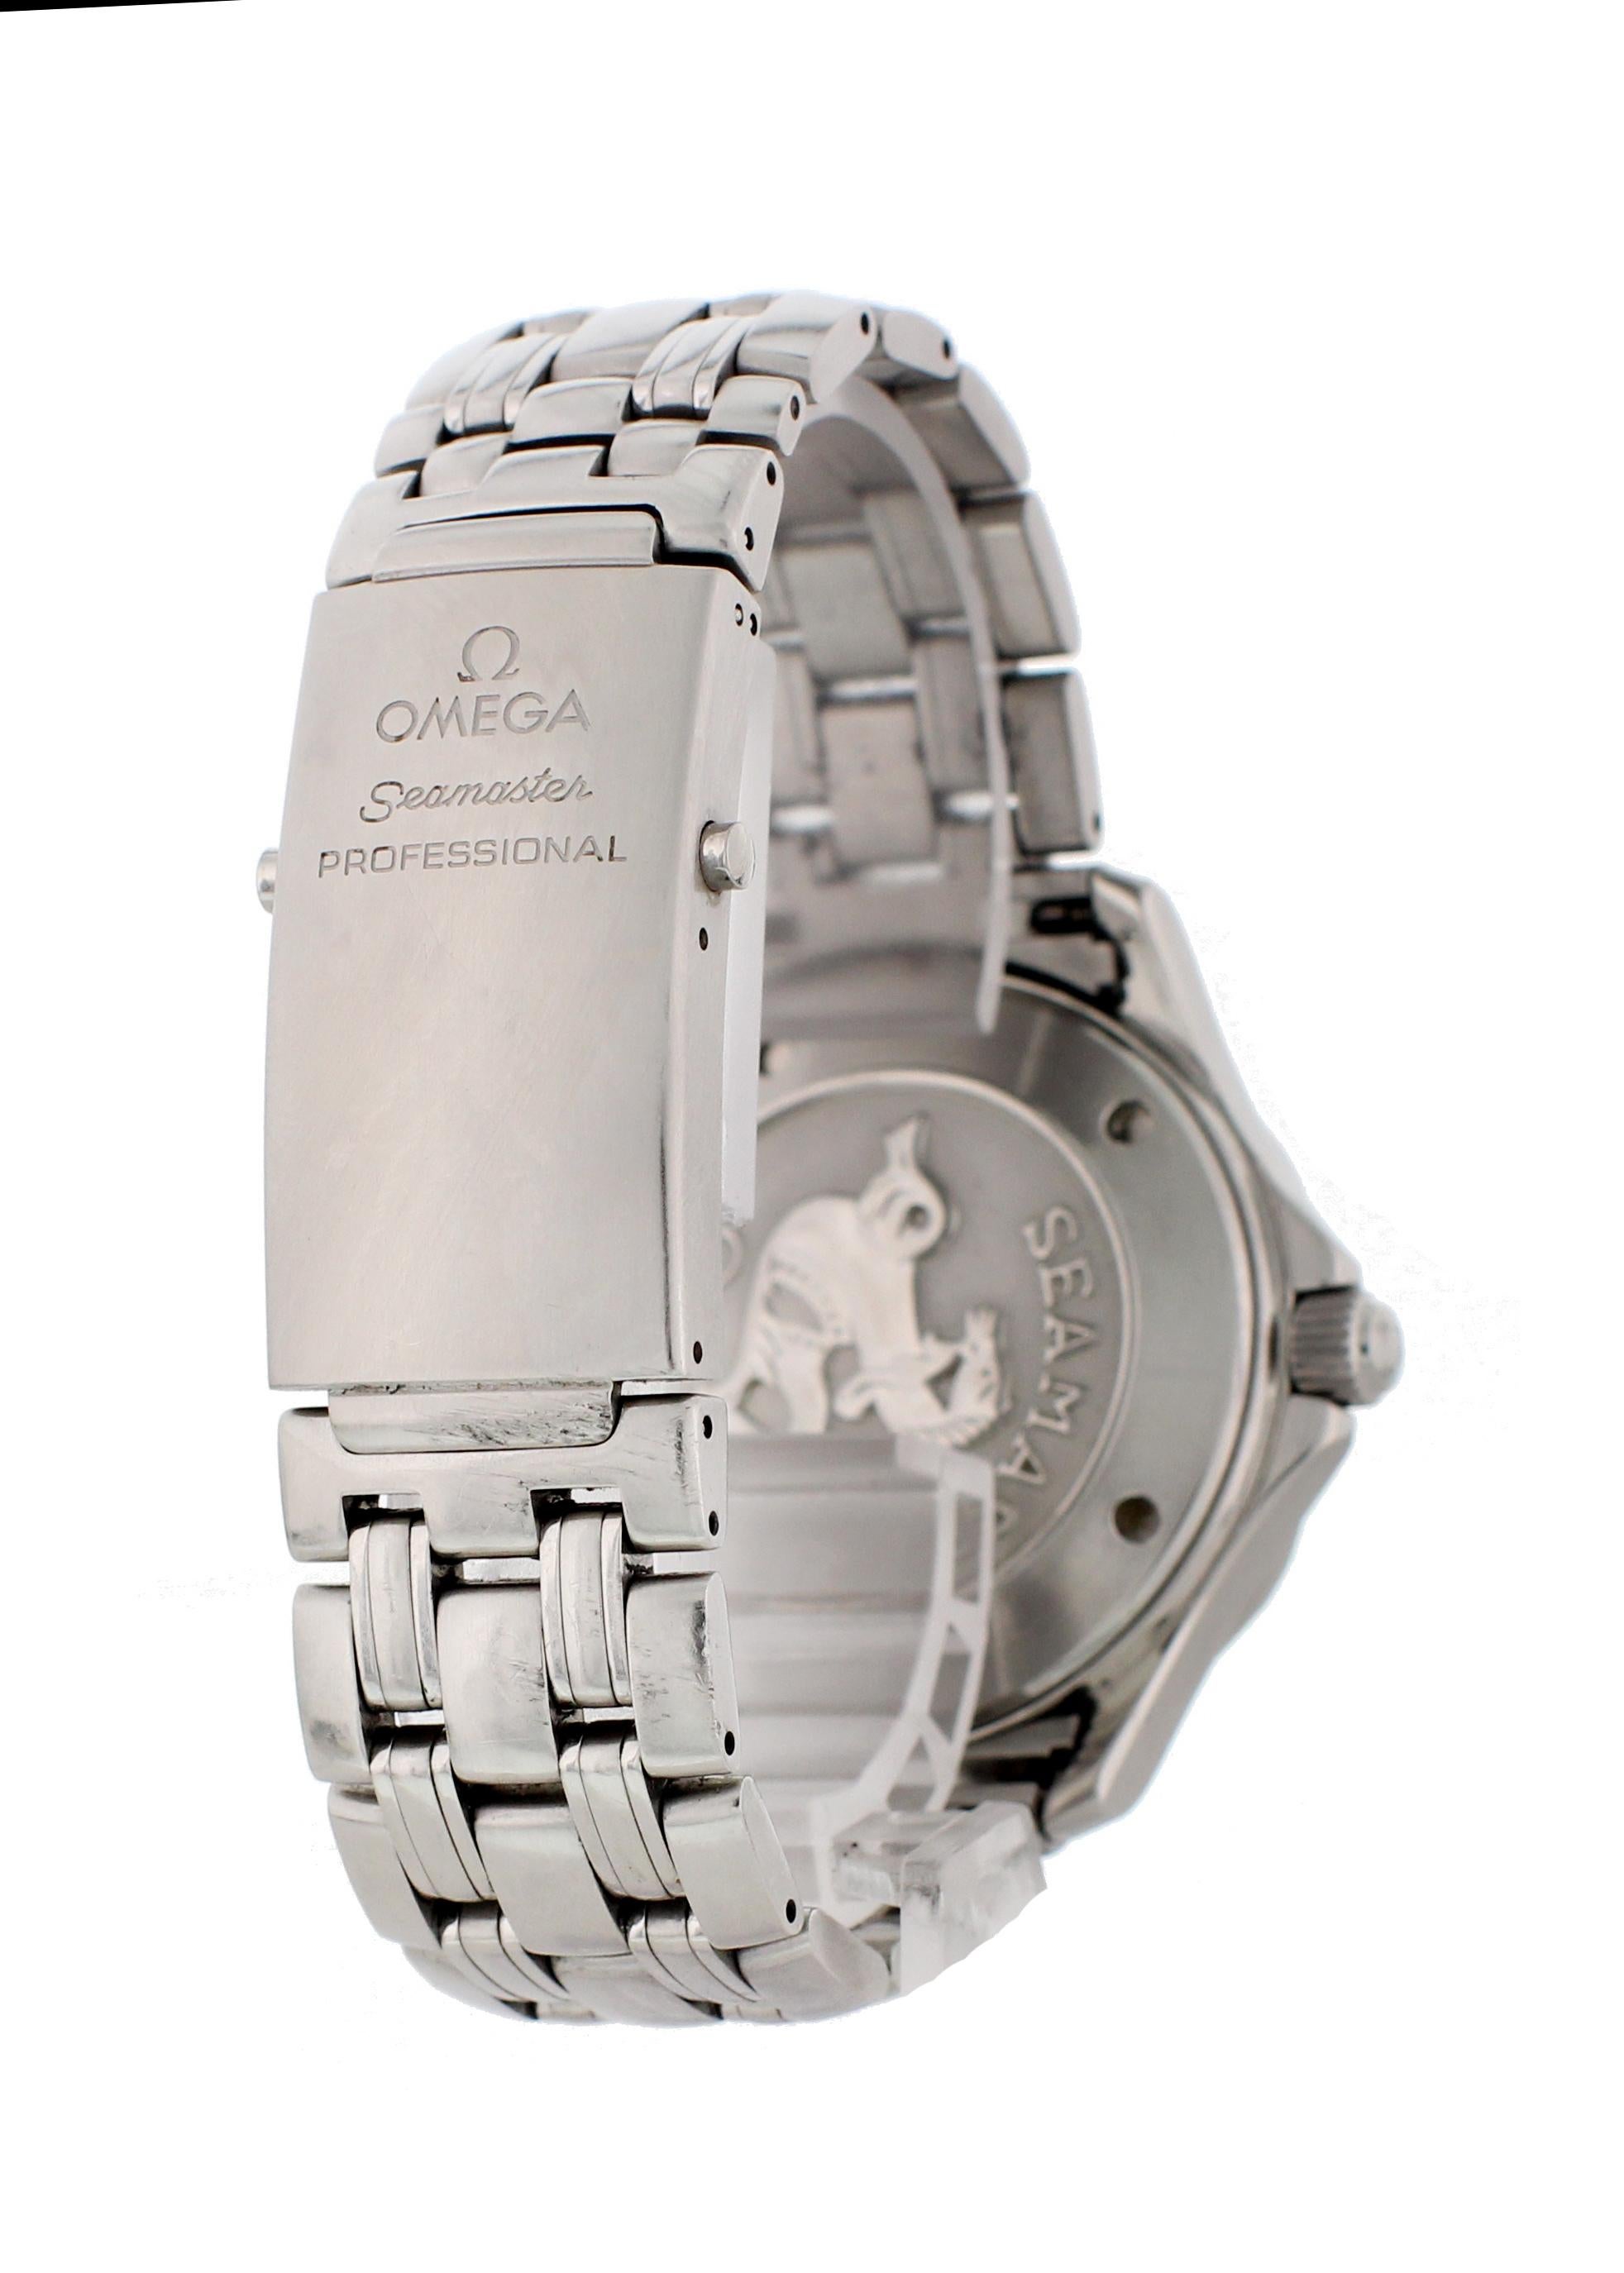 Omega Seamaster Professional 2221.80.00 Men's Watch For Sale 1